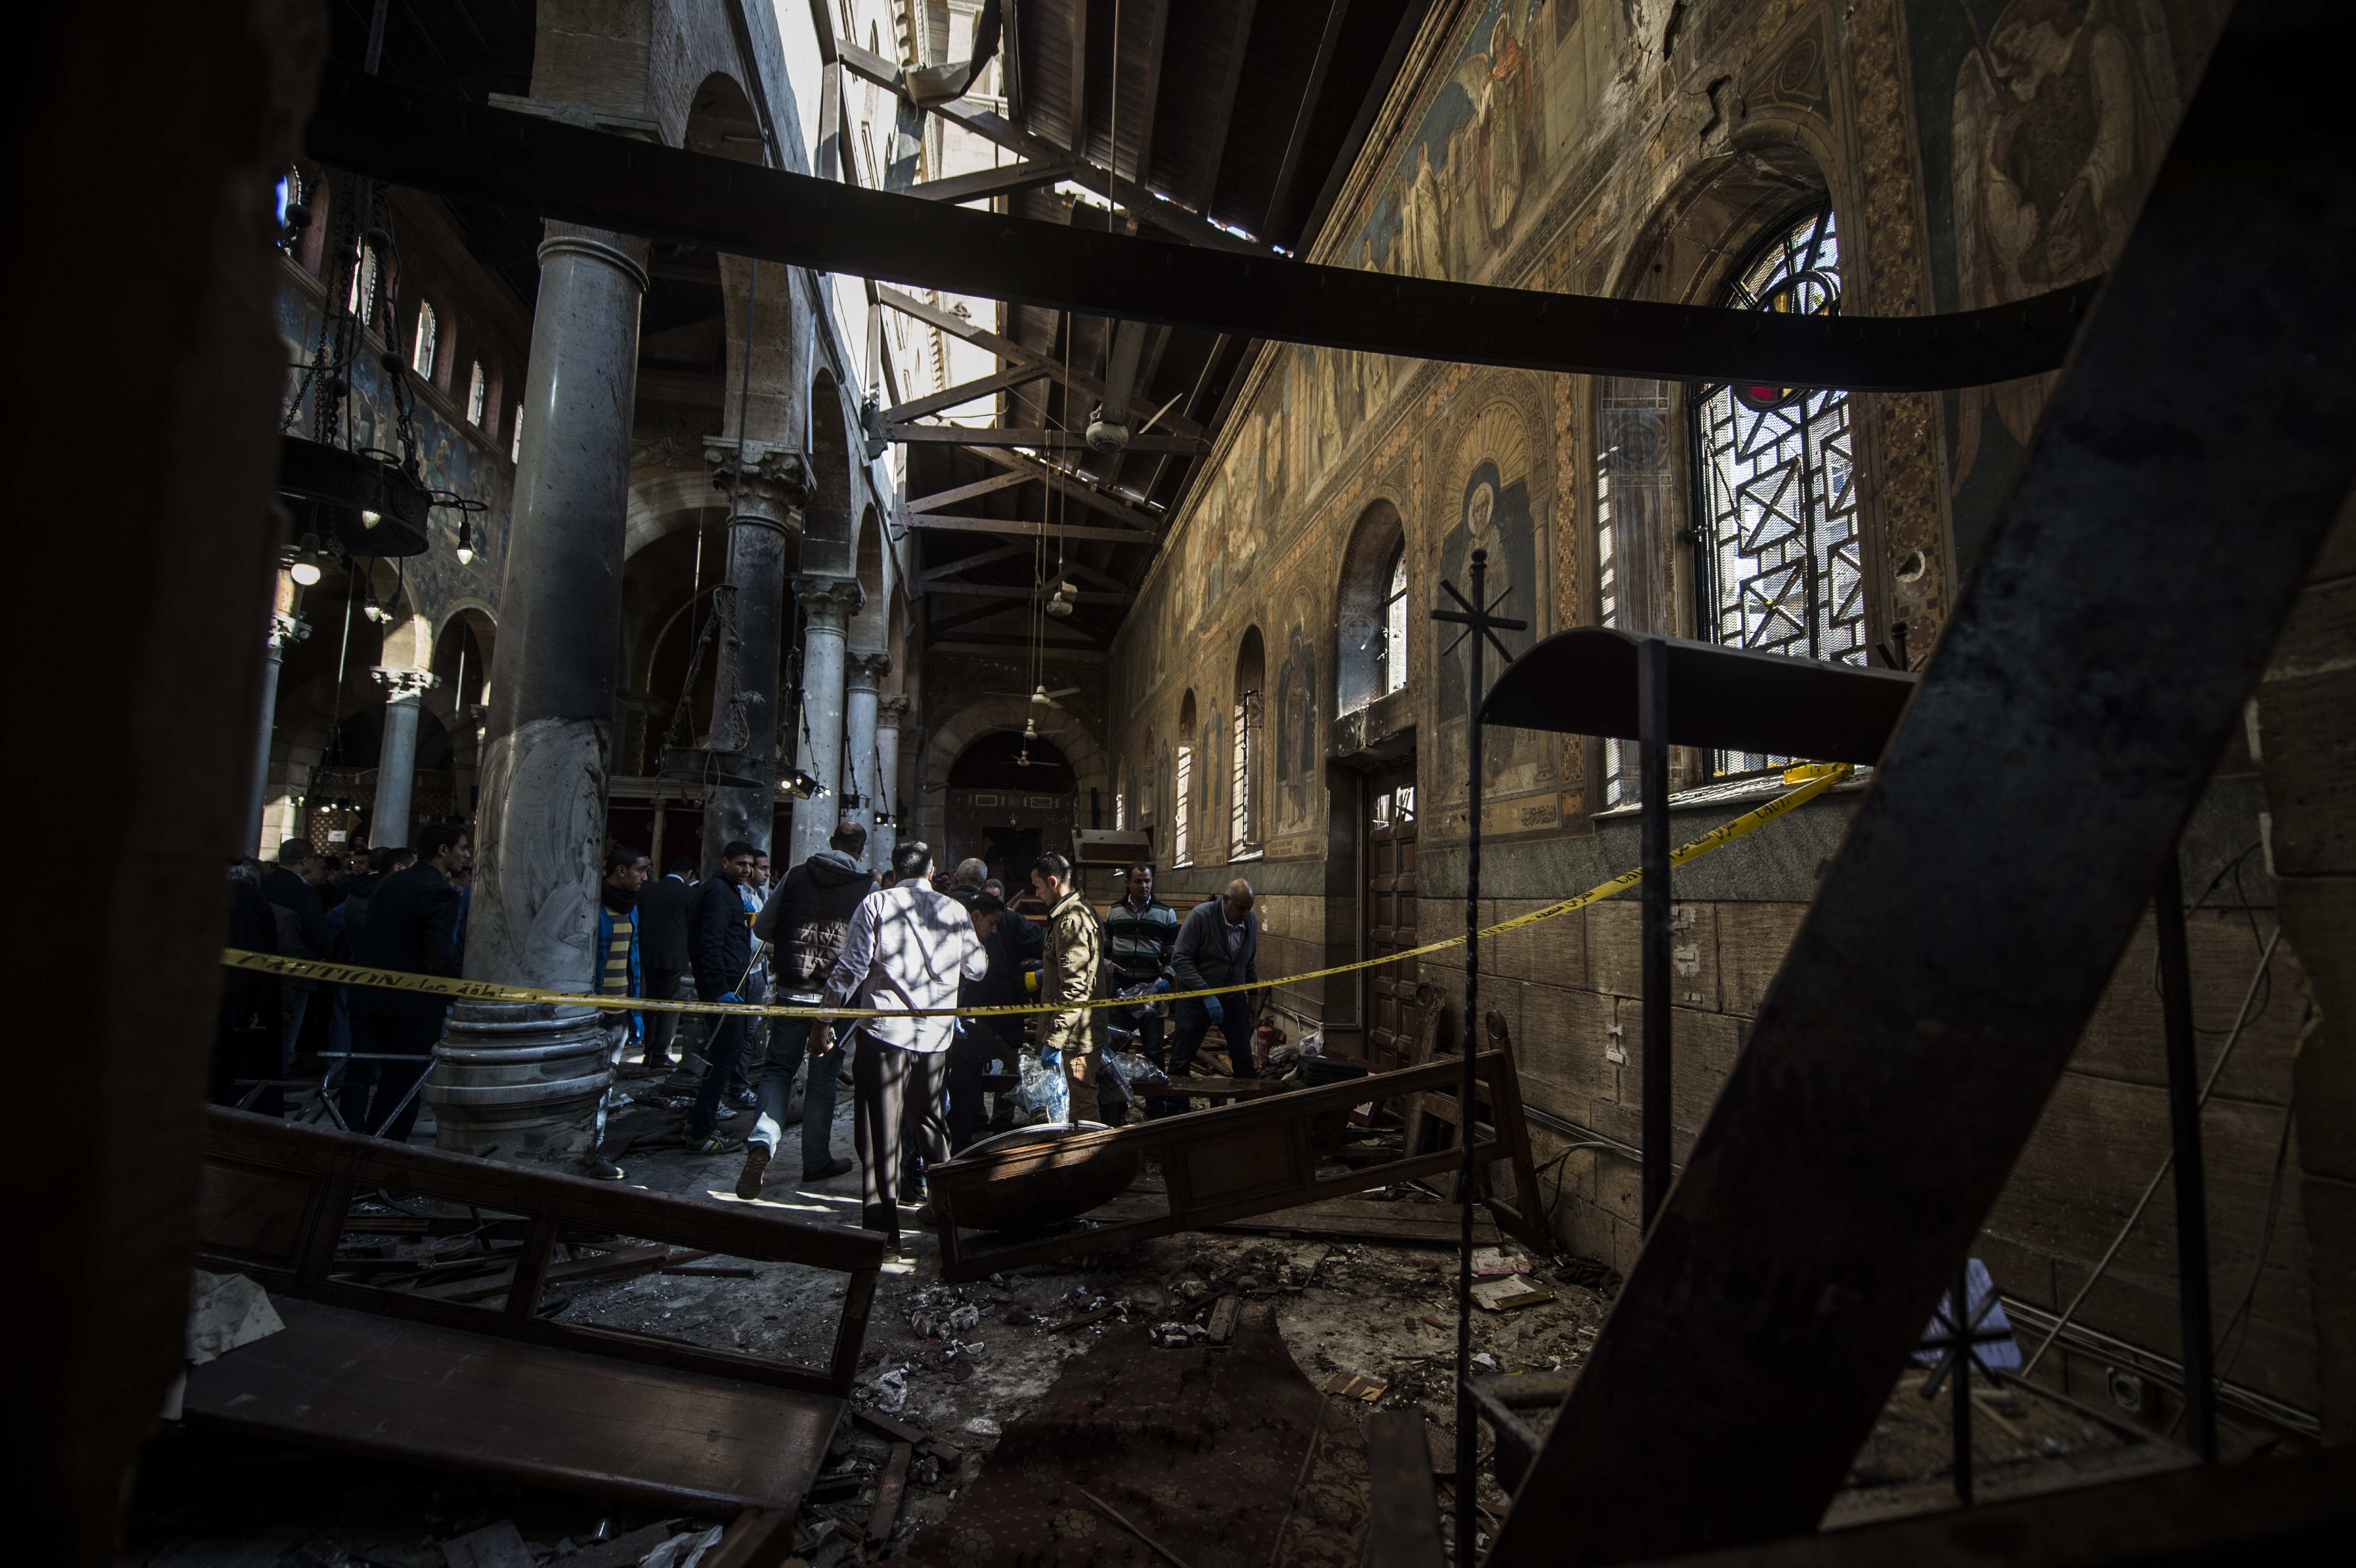 Egyptian security forces inspect the scene of a bomb explosion at the Saint Peter and Saint Paul Coptic Orthodox Church on December 11, 2016, in Cairo's Abbasiya neighbourhood. The blast killed at least 25 worshippers during Sunday mass inside the Cairo church near the seat of the Coptic pope who heads Egypt's Christian minority, state media said. / AFP PHOTO / KHALED DESOUKI